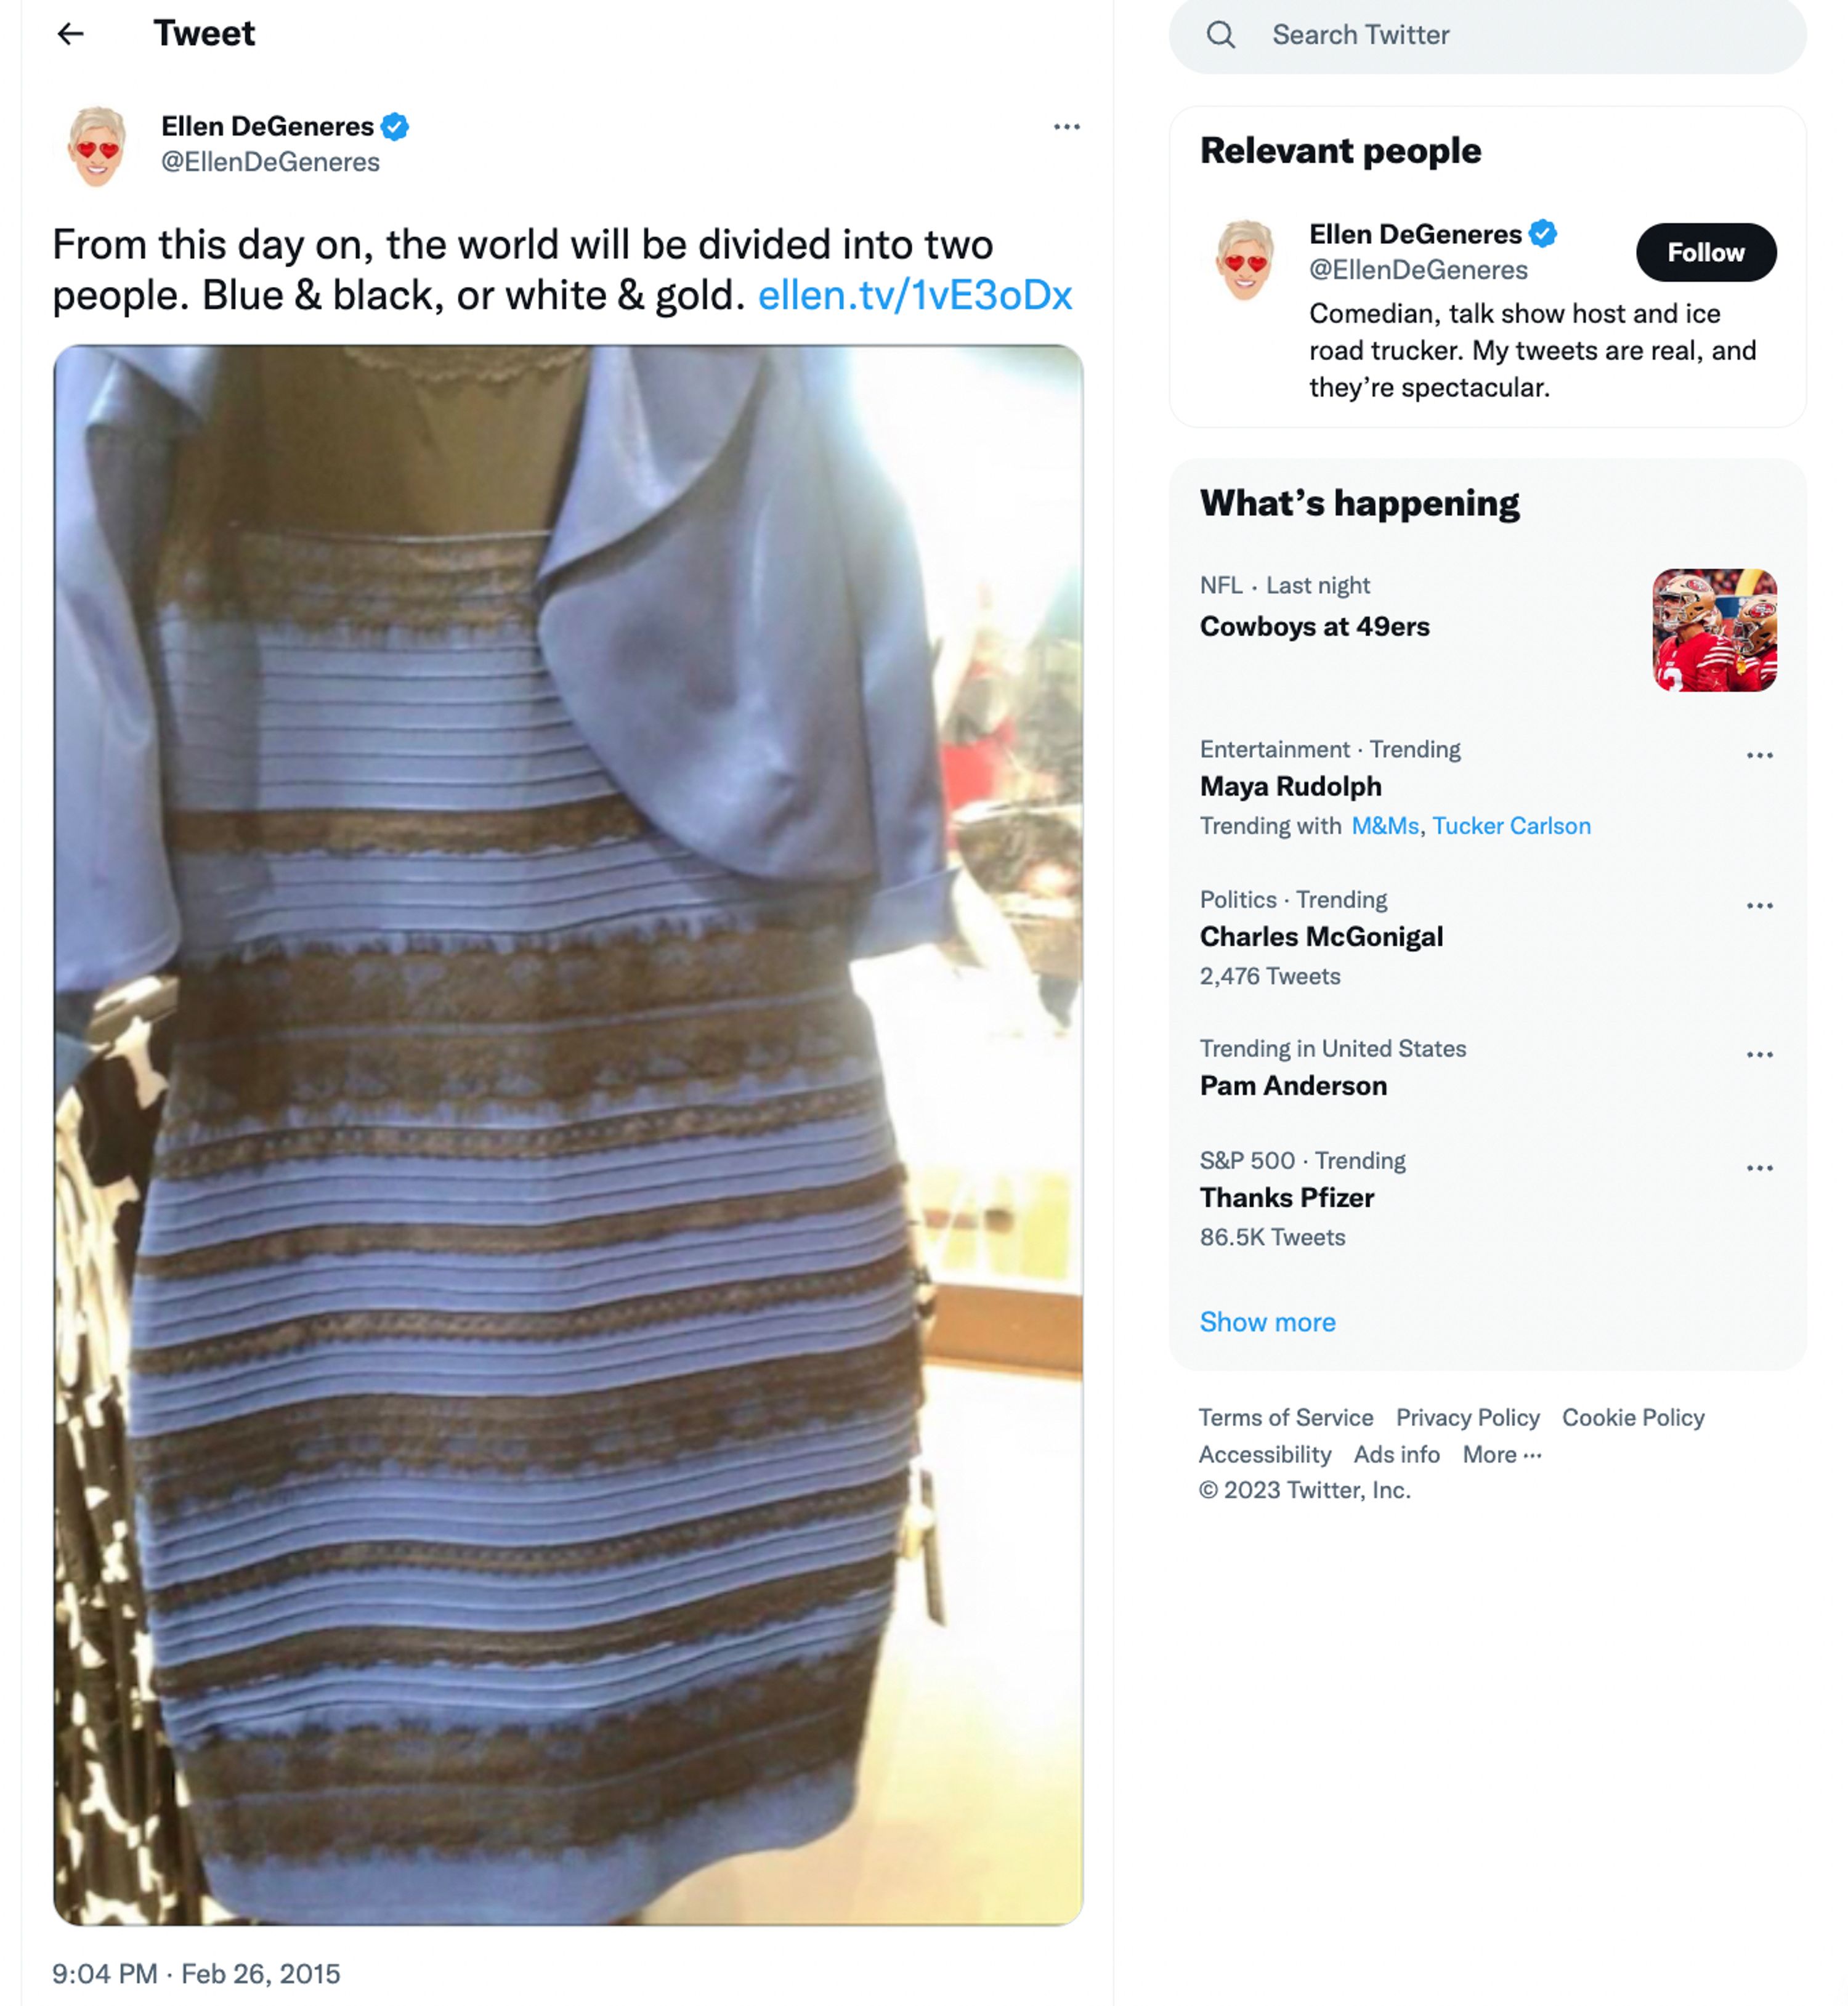 The science behind the dress colour illusion, Internet